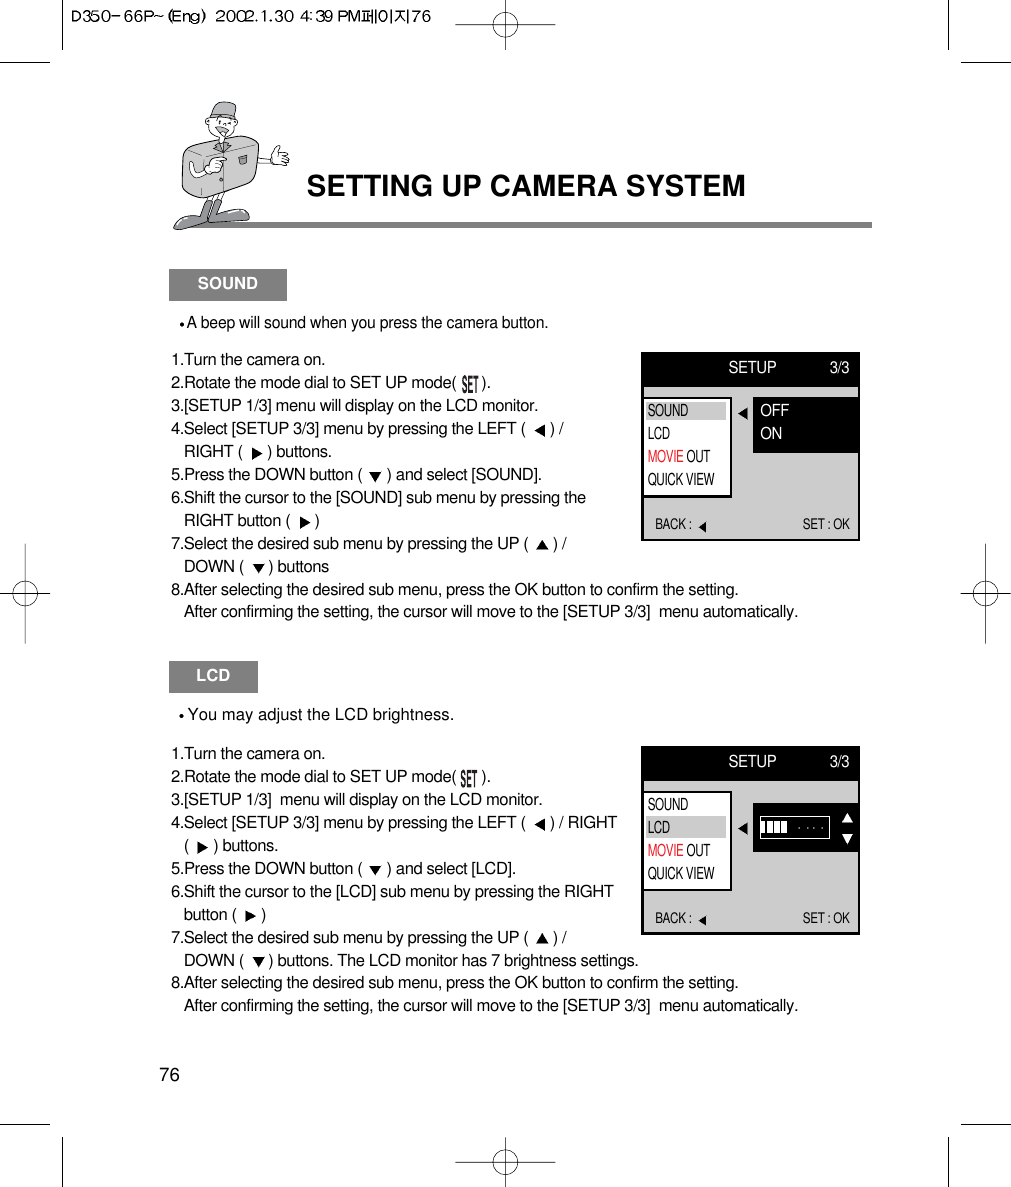 SETTING UP CAMERA SYSTEM76LCDYou may adjust the LCD brightness.1.Turn the camera on.2.Rotate the mode dial to SET UP mode(      ).3.[SETUP 1/3]  menu will display on the LCD monitor.4.Select [SETUP 3/3] menu by pressing the LEFT (  ) / RIGHT(  ) buttons.5.Press the DOWN button (  ) and select [LCD].6.Shift the cursor to the [LCD] sub menu by pressing the RIGHTbutton (  ) 7.Select the desired sub menu by pressing the UP (  ) / DOWN (  ) buttons. The LCD monitor has 7 brightness settings.8.After selecting the desired sub menu, press the OK button to confirm the setting. After confirming the setting, the cursor will move to the [SETUP 3/3]  menu automatically.SETUP 3/3BACK :  SET : OKSOUNDLCDMOVIE OUTQUICK VIEWSOUNDA beep will sound when you press the camera button.1.Turn the camera on.2.Rotate the mode dial to SET UP mode(      ).3.[SETUP 1/3] menu will display on the LCD monitor.4.Select [SETUP 3/3] menu by pressing the LEFT (  ) /RIGHT (  ) buttons.5.Press the DOWN button (  ) and select [SOUND].6.Shift the cursor to the [SOUND] sub menu by pressing theRIGHT button (  ) 7.Select the desired sub menu by pressing the UP (  ) /DOWN (  ) buttons8.After selecting the desired sub menu, press the OK button to confirm the setting. After confirming the setting, the cursor will move to the [SETUP 3/3]  menu automatically.SETUP 3/3BACK :  SET : OKOFFONSOUNDLCDMOVIE OUTQUICK VIEW